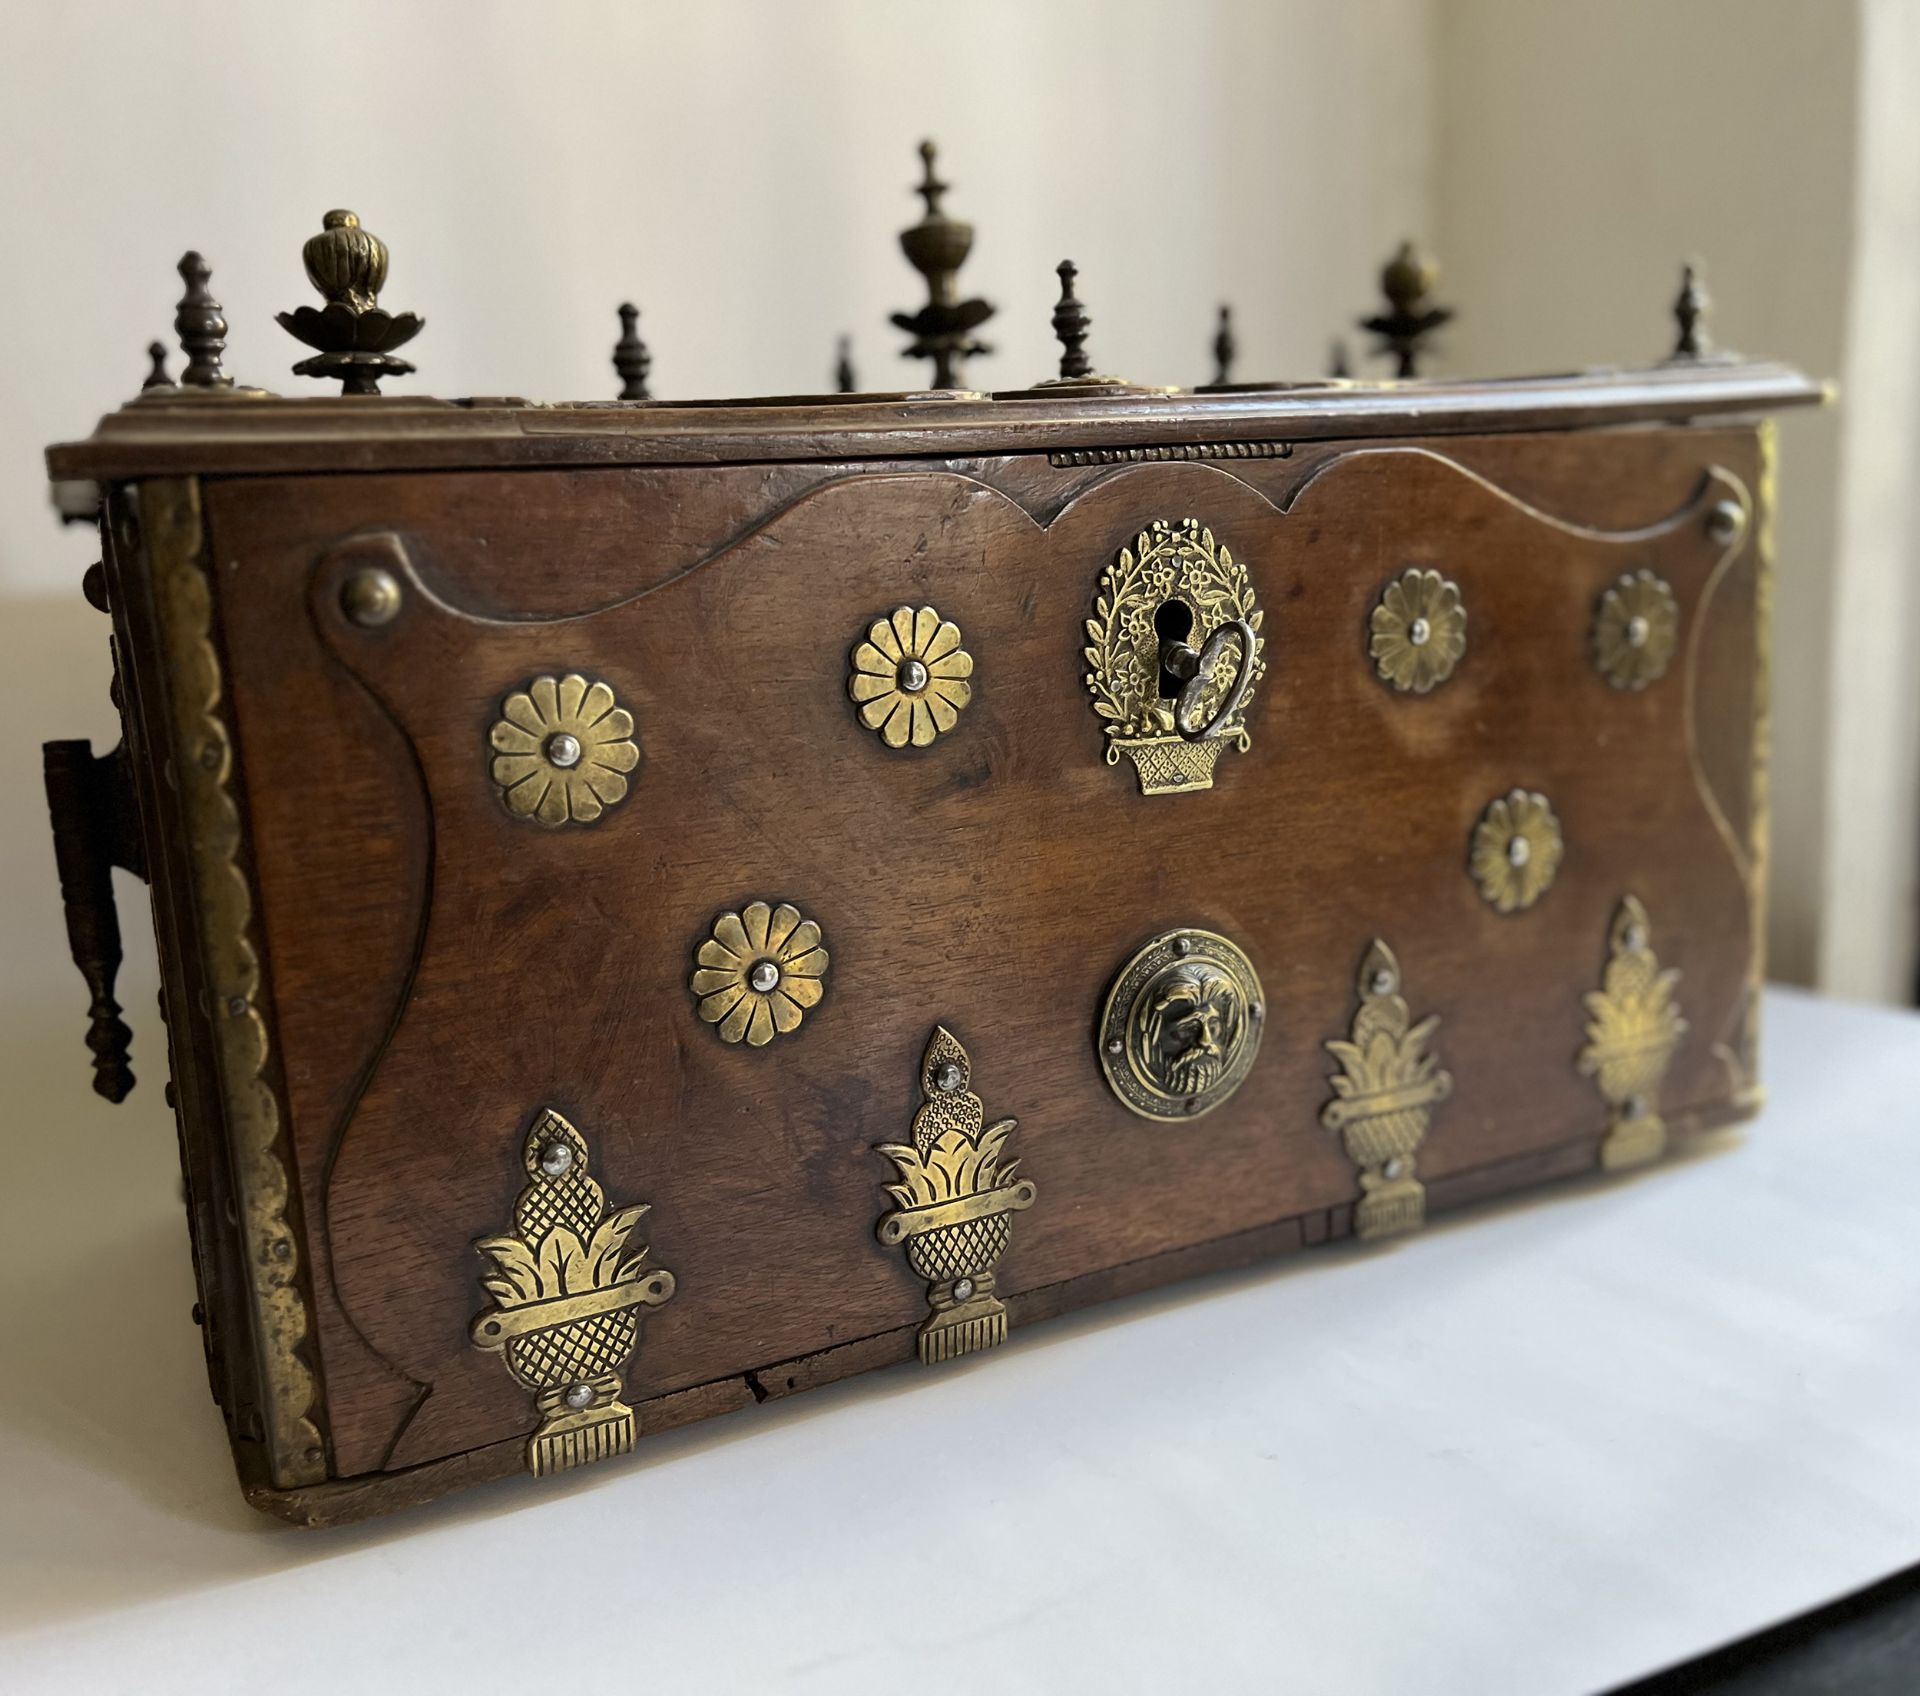 Rare Indian Colonial chest in teak and Bronze Pavilion appliqués, Gujarat, 18th century - Image 2 of 8